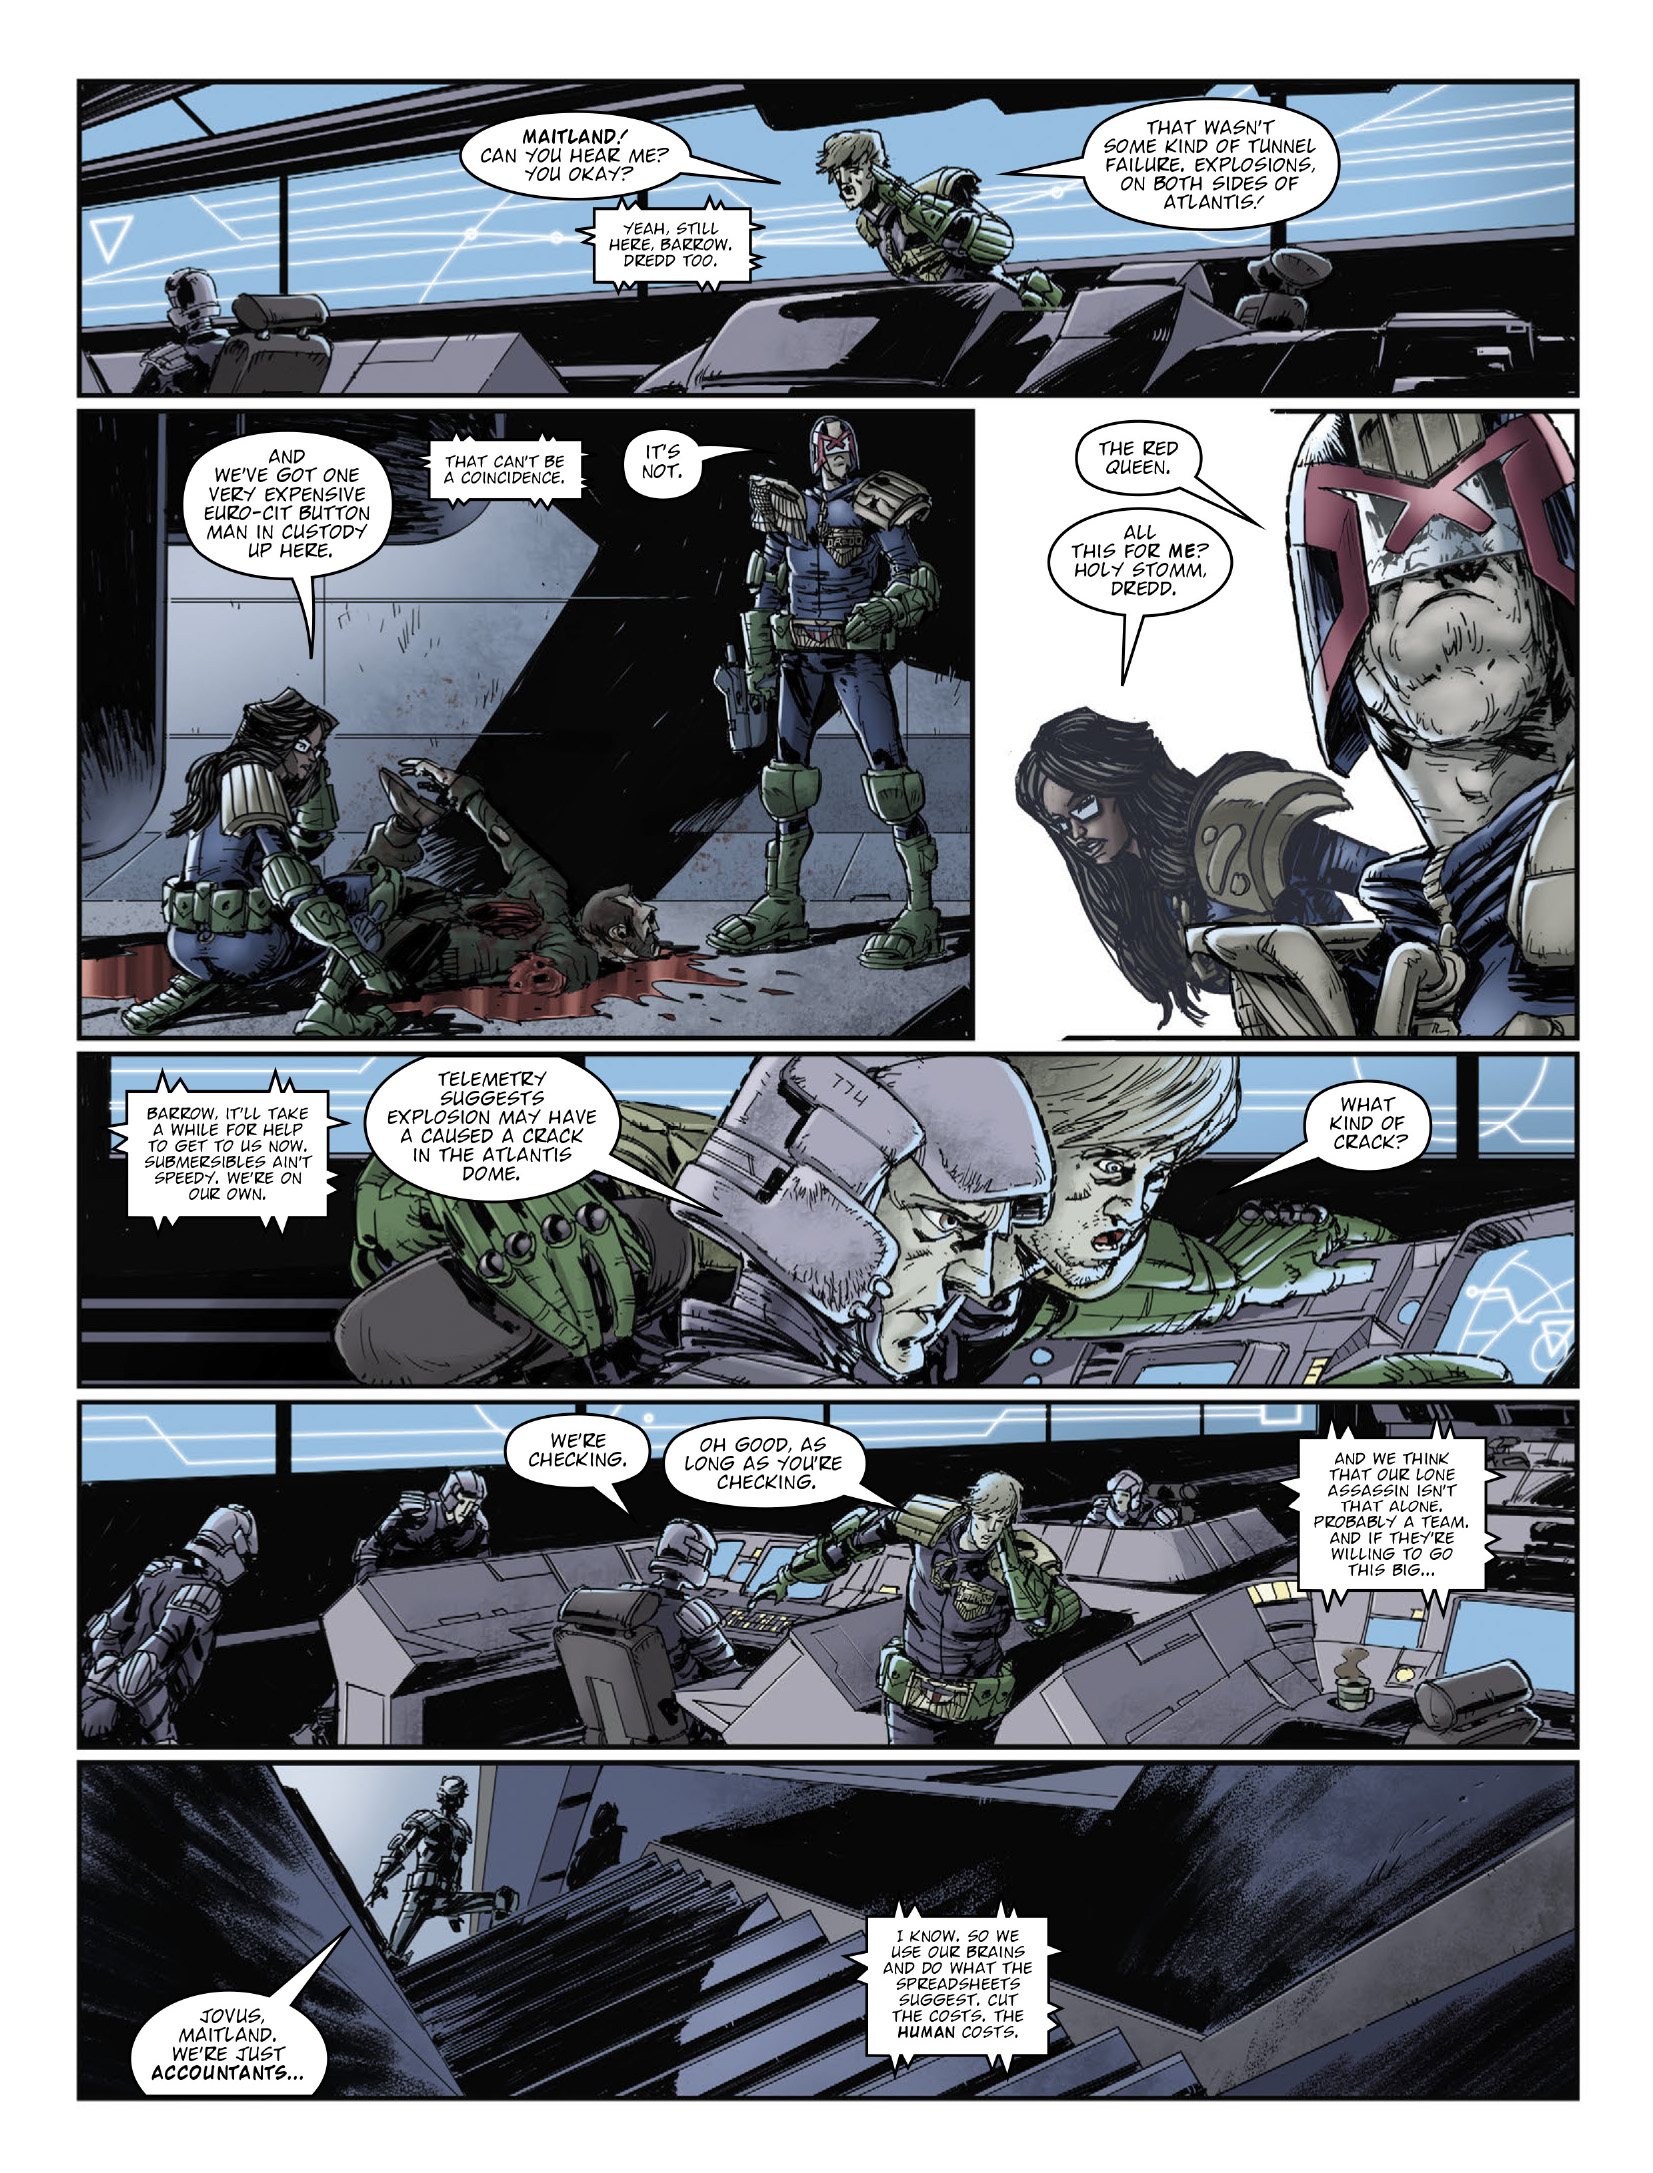 2000 AD: Chapter 2252 - Page 4